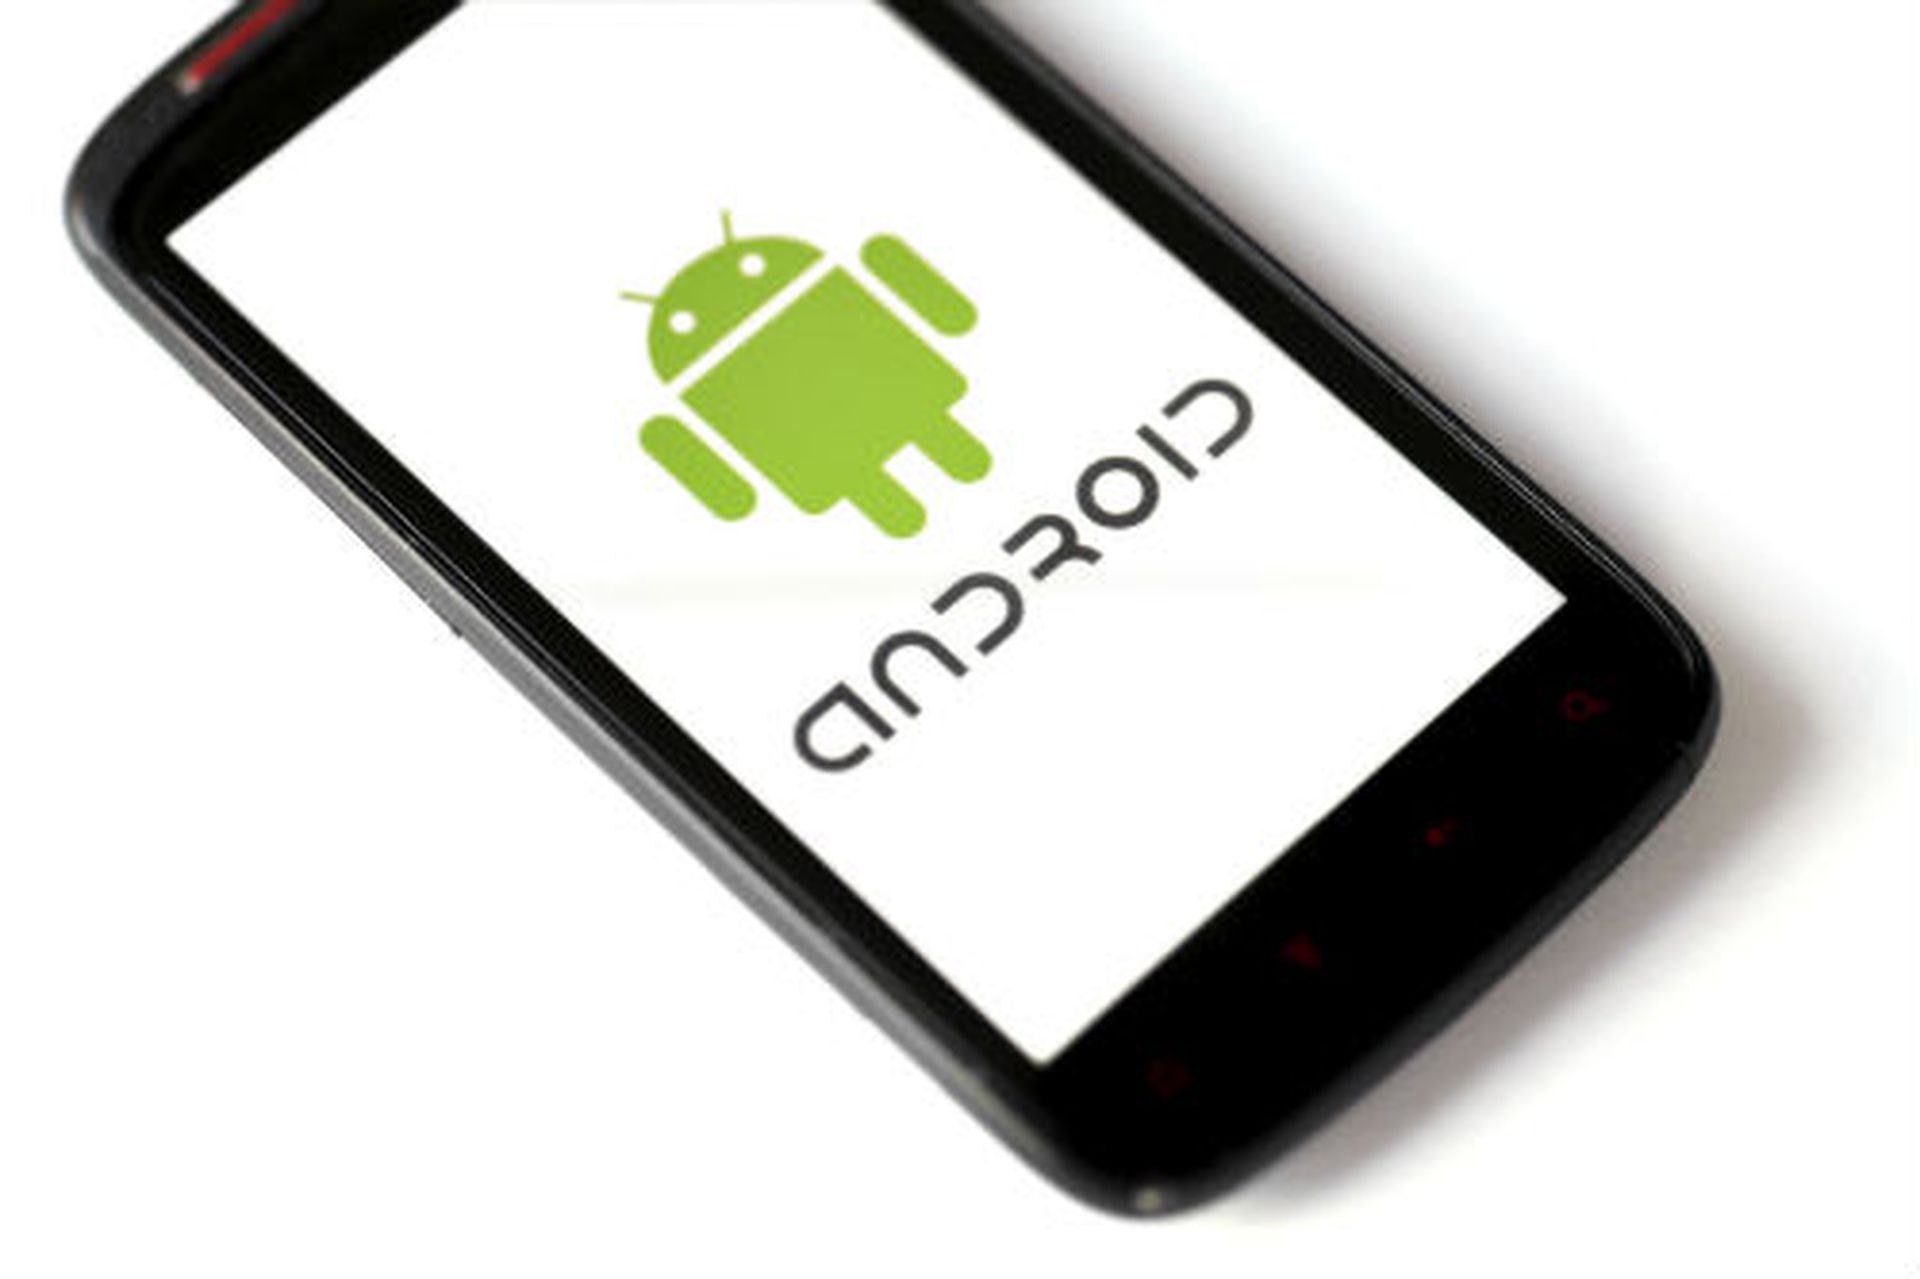 "Android malware SandroRAT disguised as mobile security app"